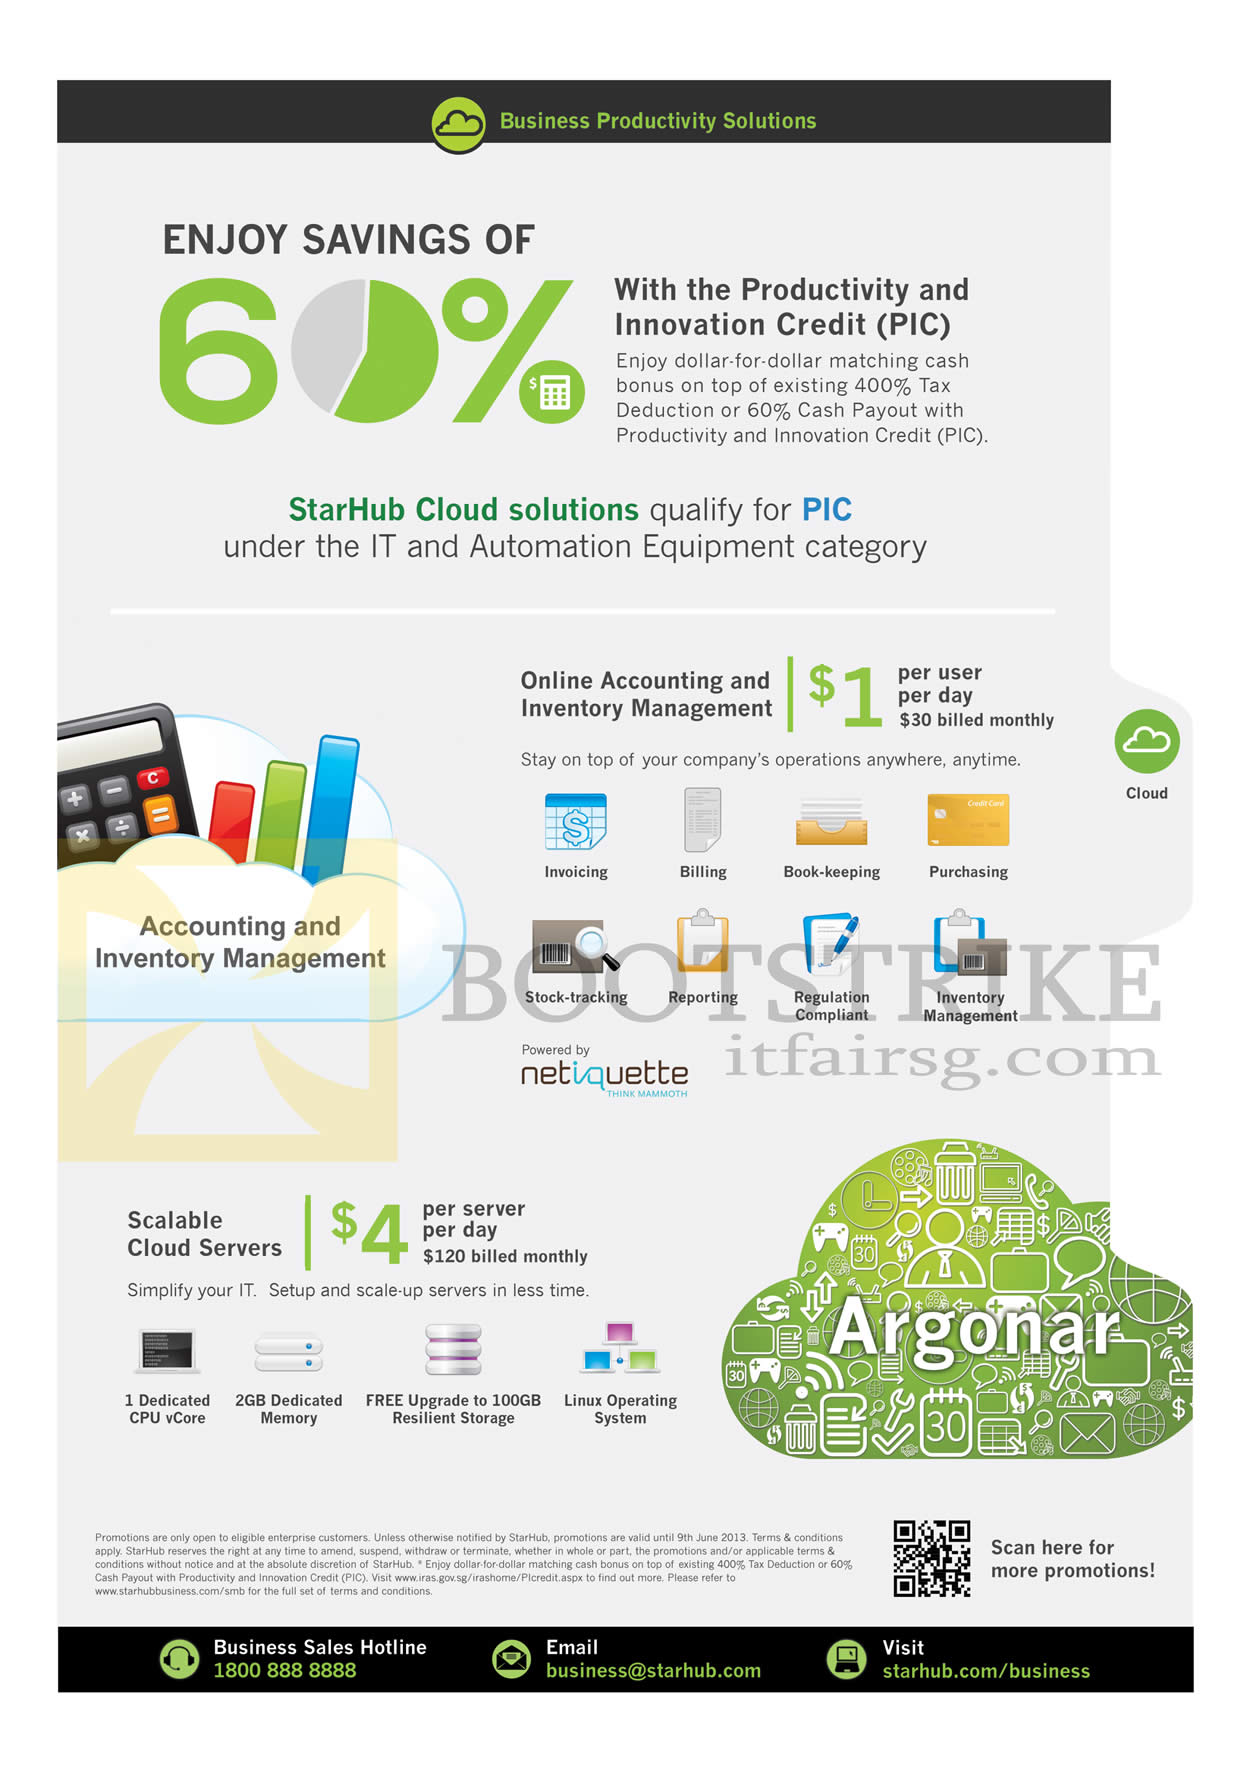 PC SHOW 2013 price list image brochure of Starhub Business PIC Credit Cloud Solutions, Online Accounting N Inventory Management, Cloud Servers